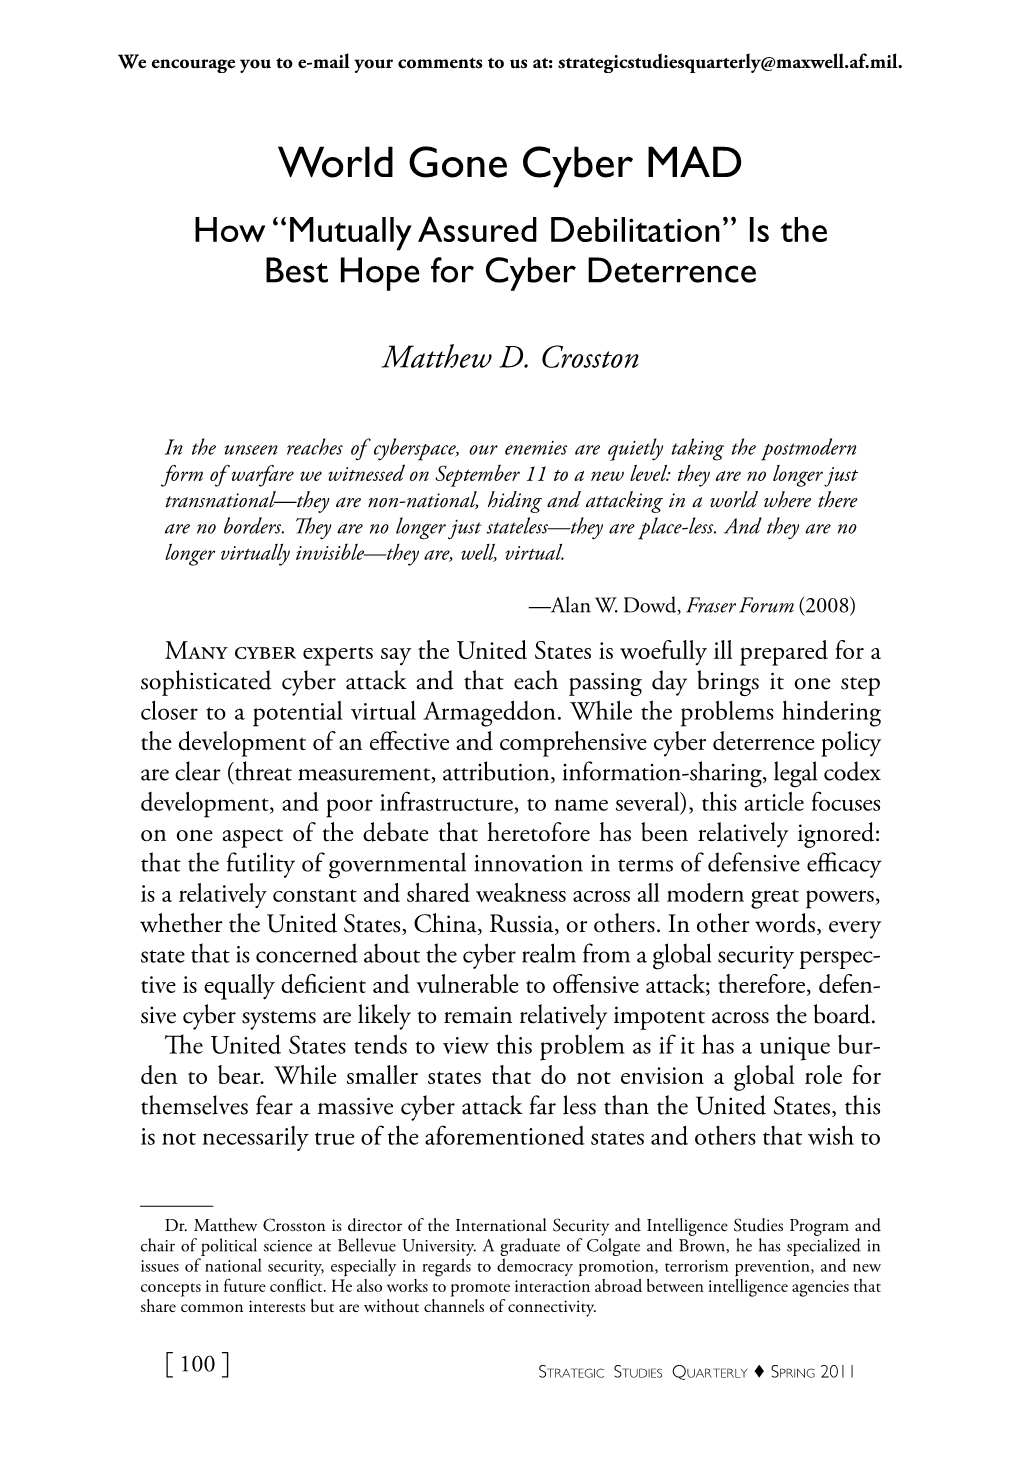 World Gone Cyber MAD: How “Mutually Assured Debilitation” Is the Best Hope for Cyber Deterrence